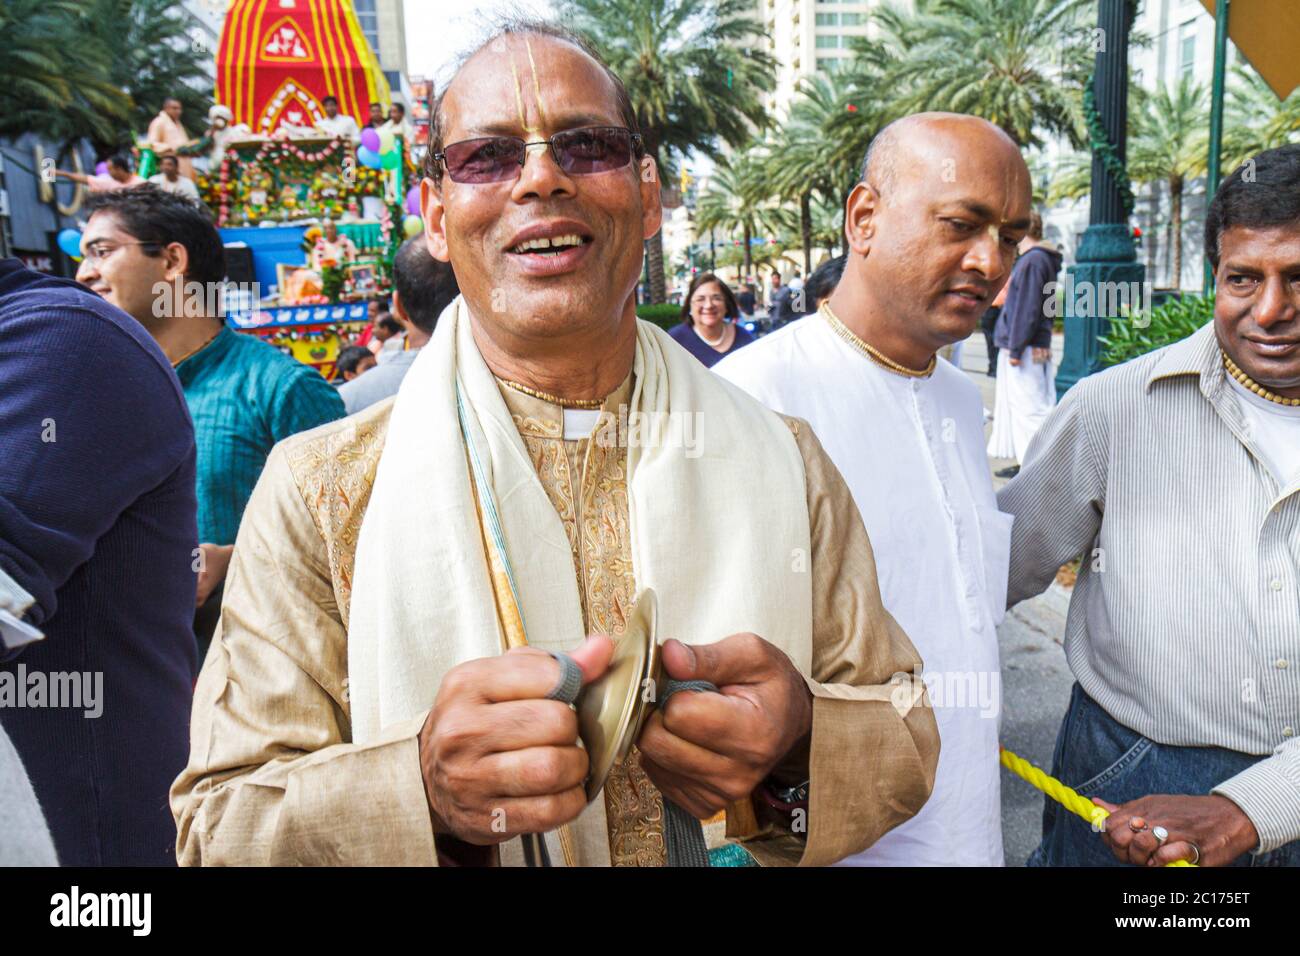 New Orleans Louisiana,downtown,Canal Street,Festival of India,Rath Yatra,Hare Krishna,Hinduism,Eastern religion,festival,parade,procession,Asian man m Stock Photo